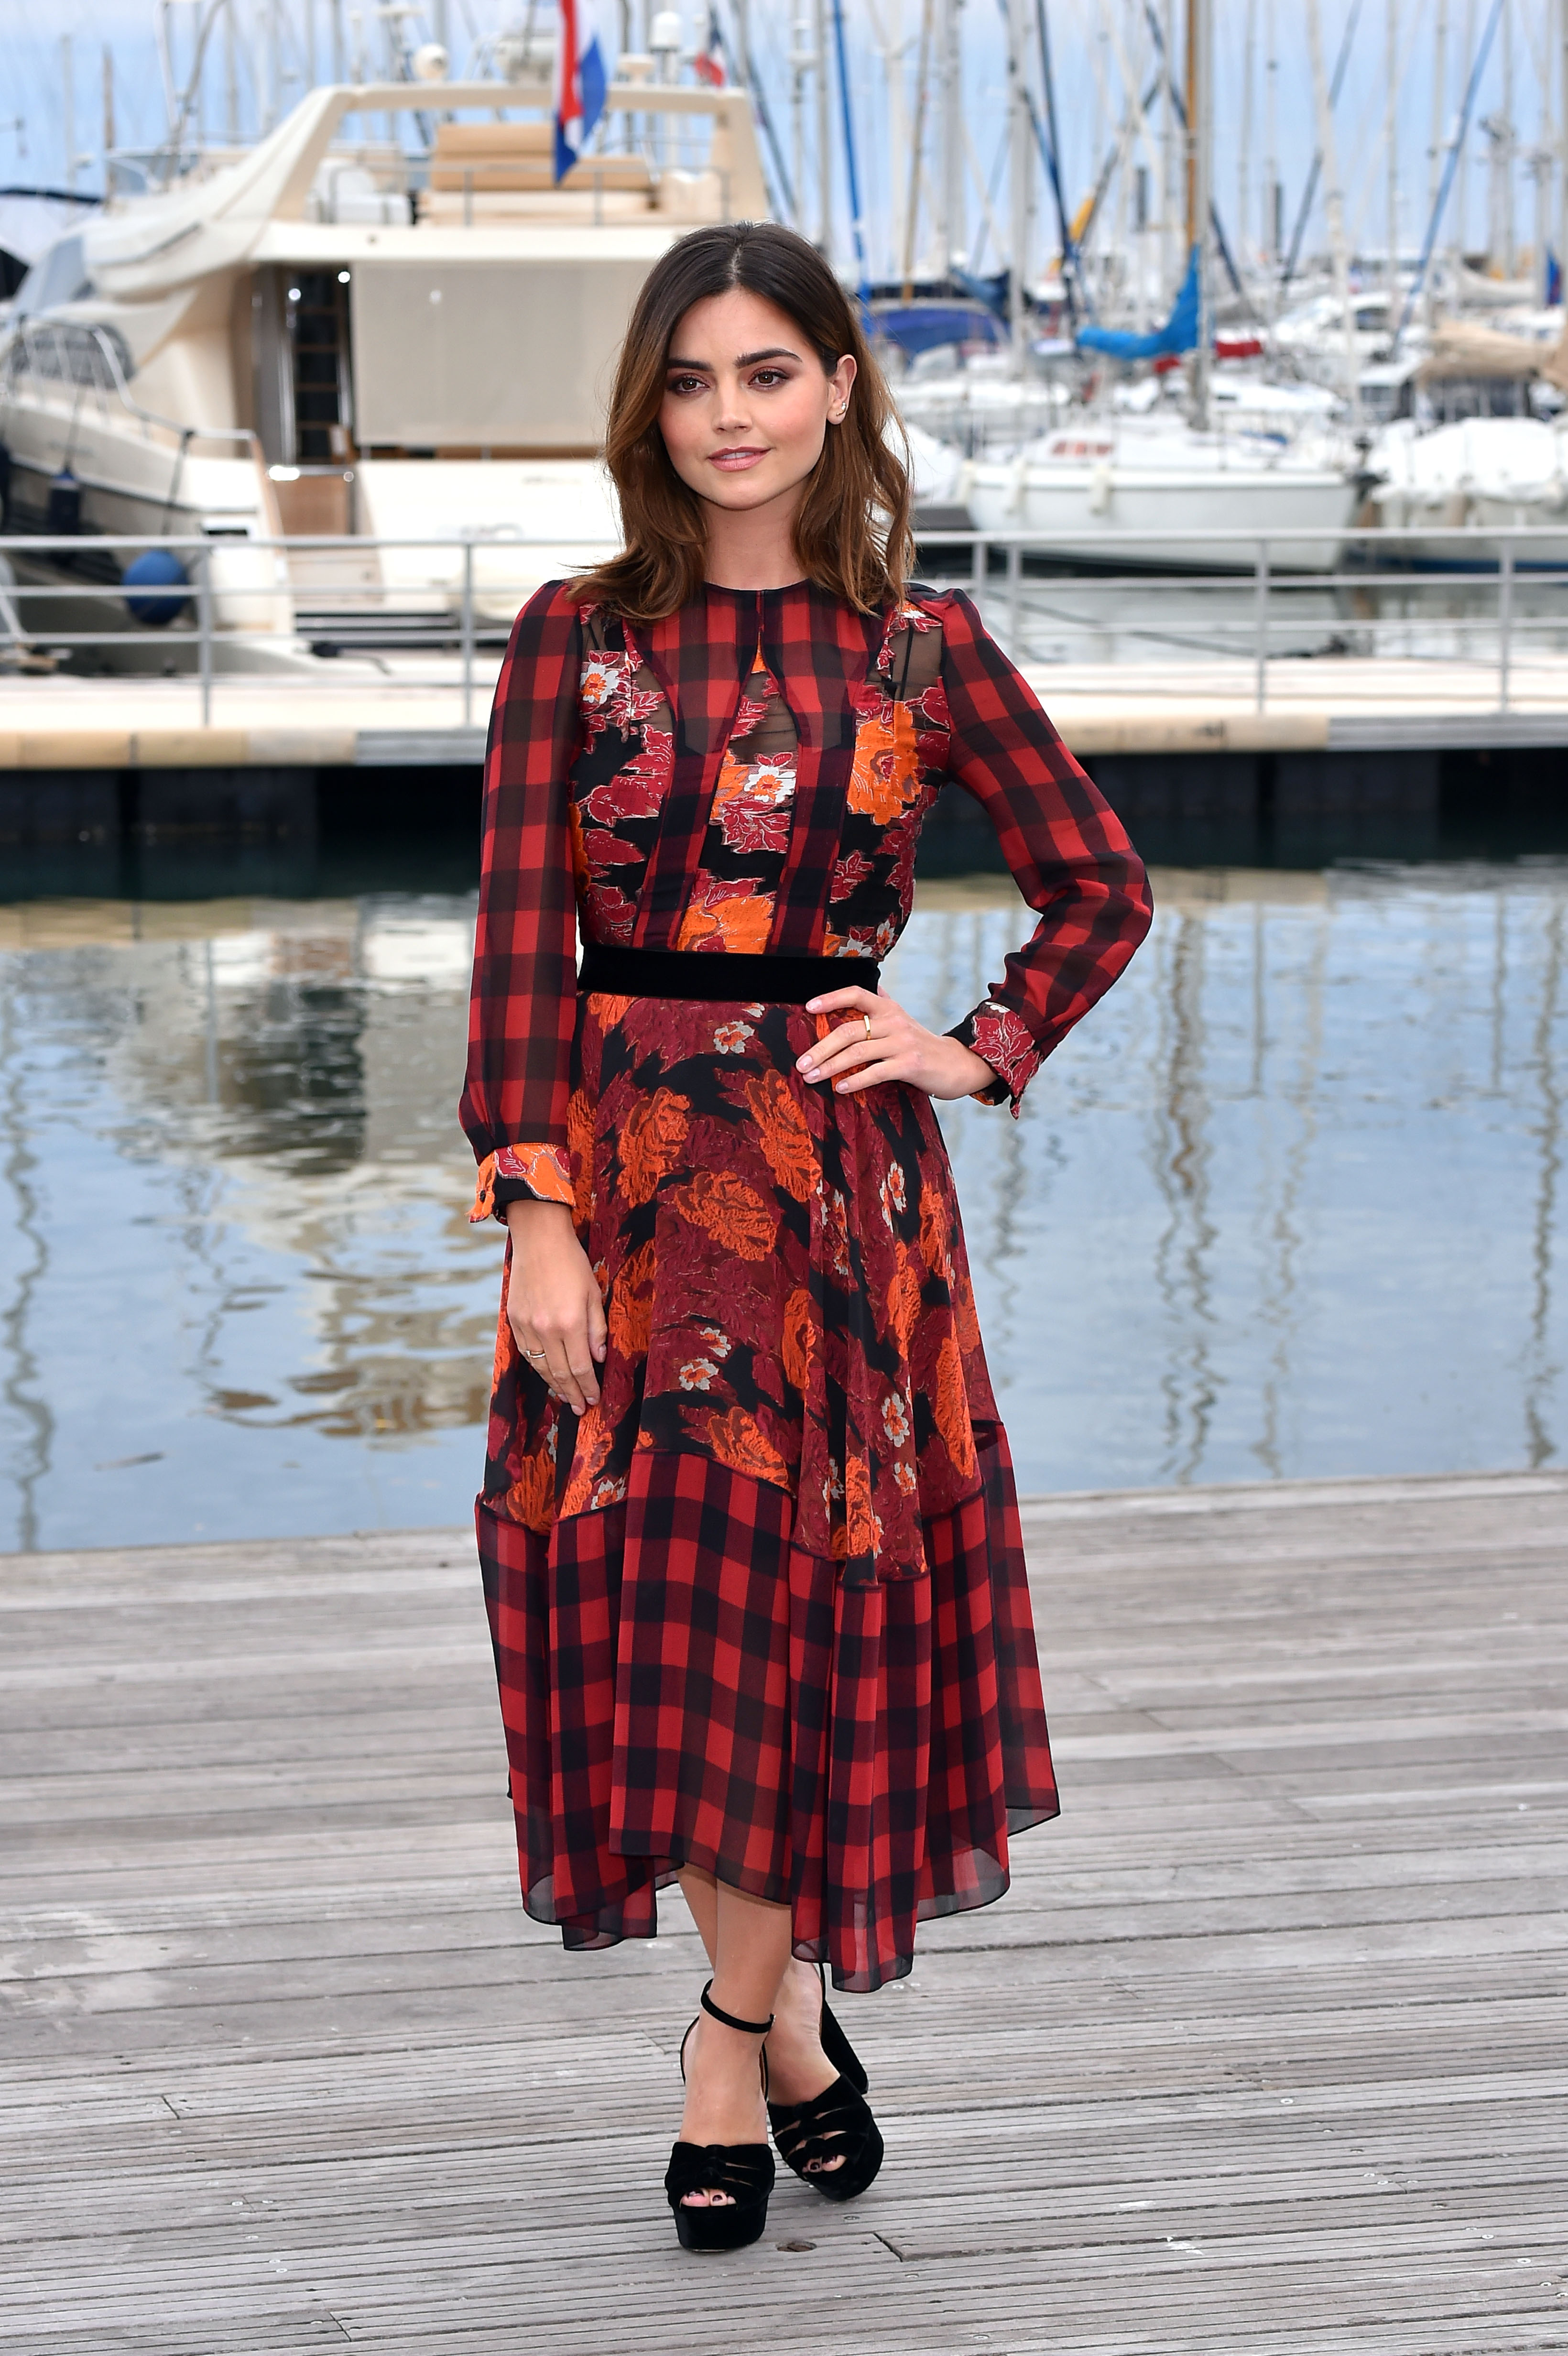 Recent Fugs and Fabs: Jenna Coleman